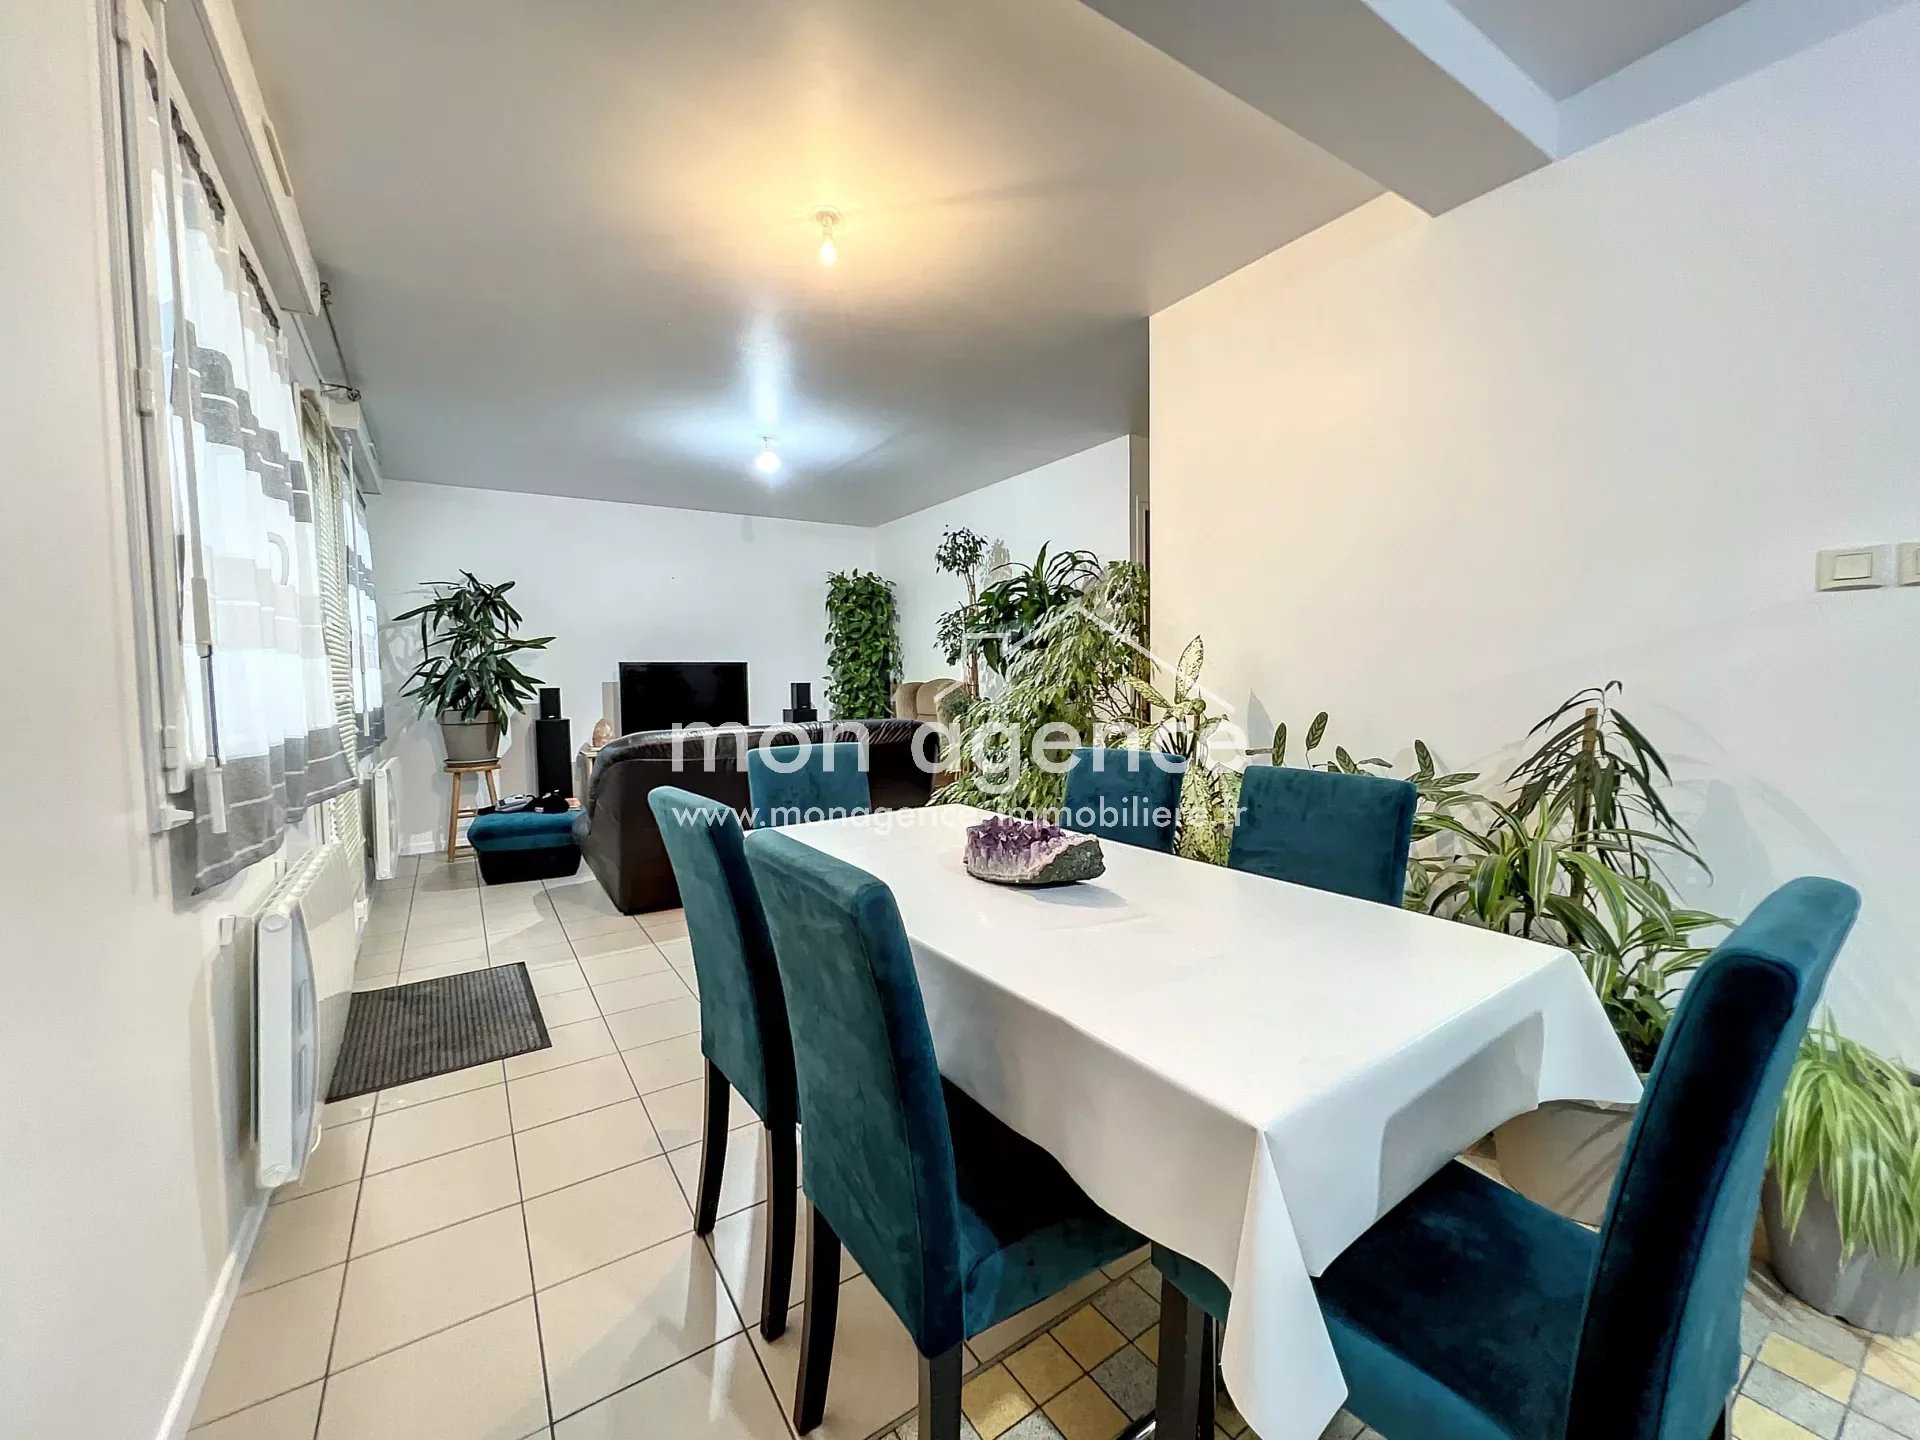 Cailly centre 76690, appartement F3